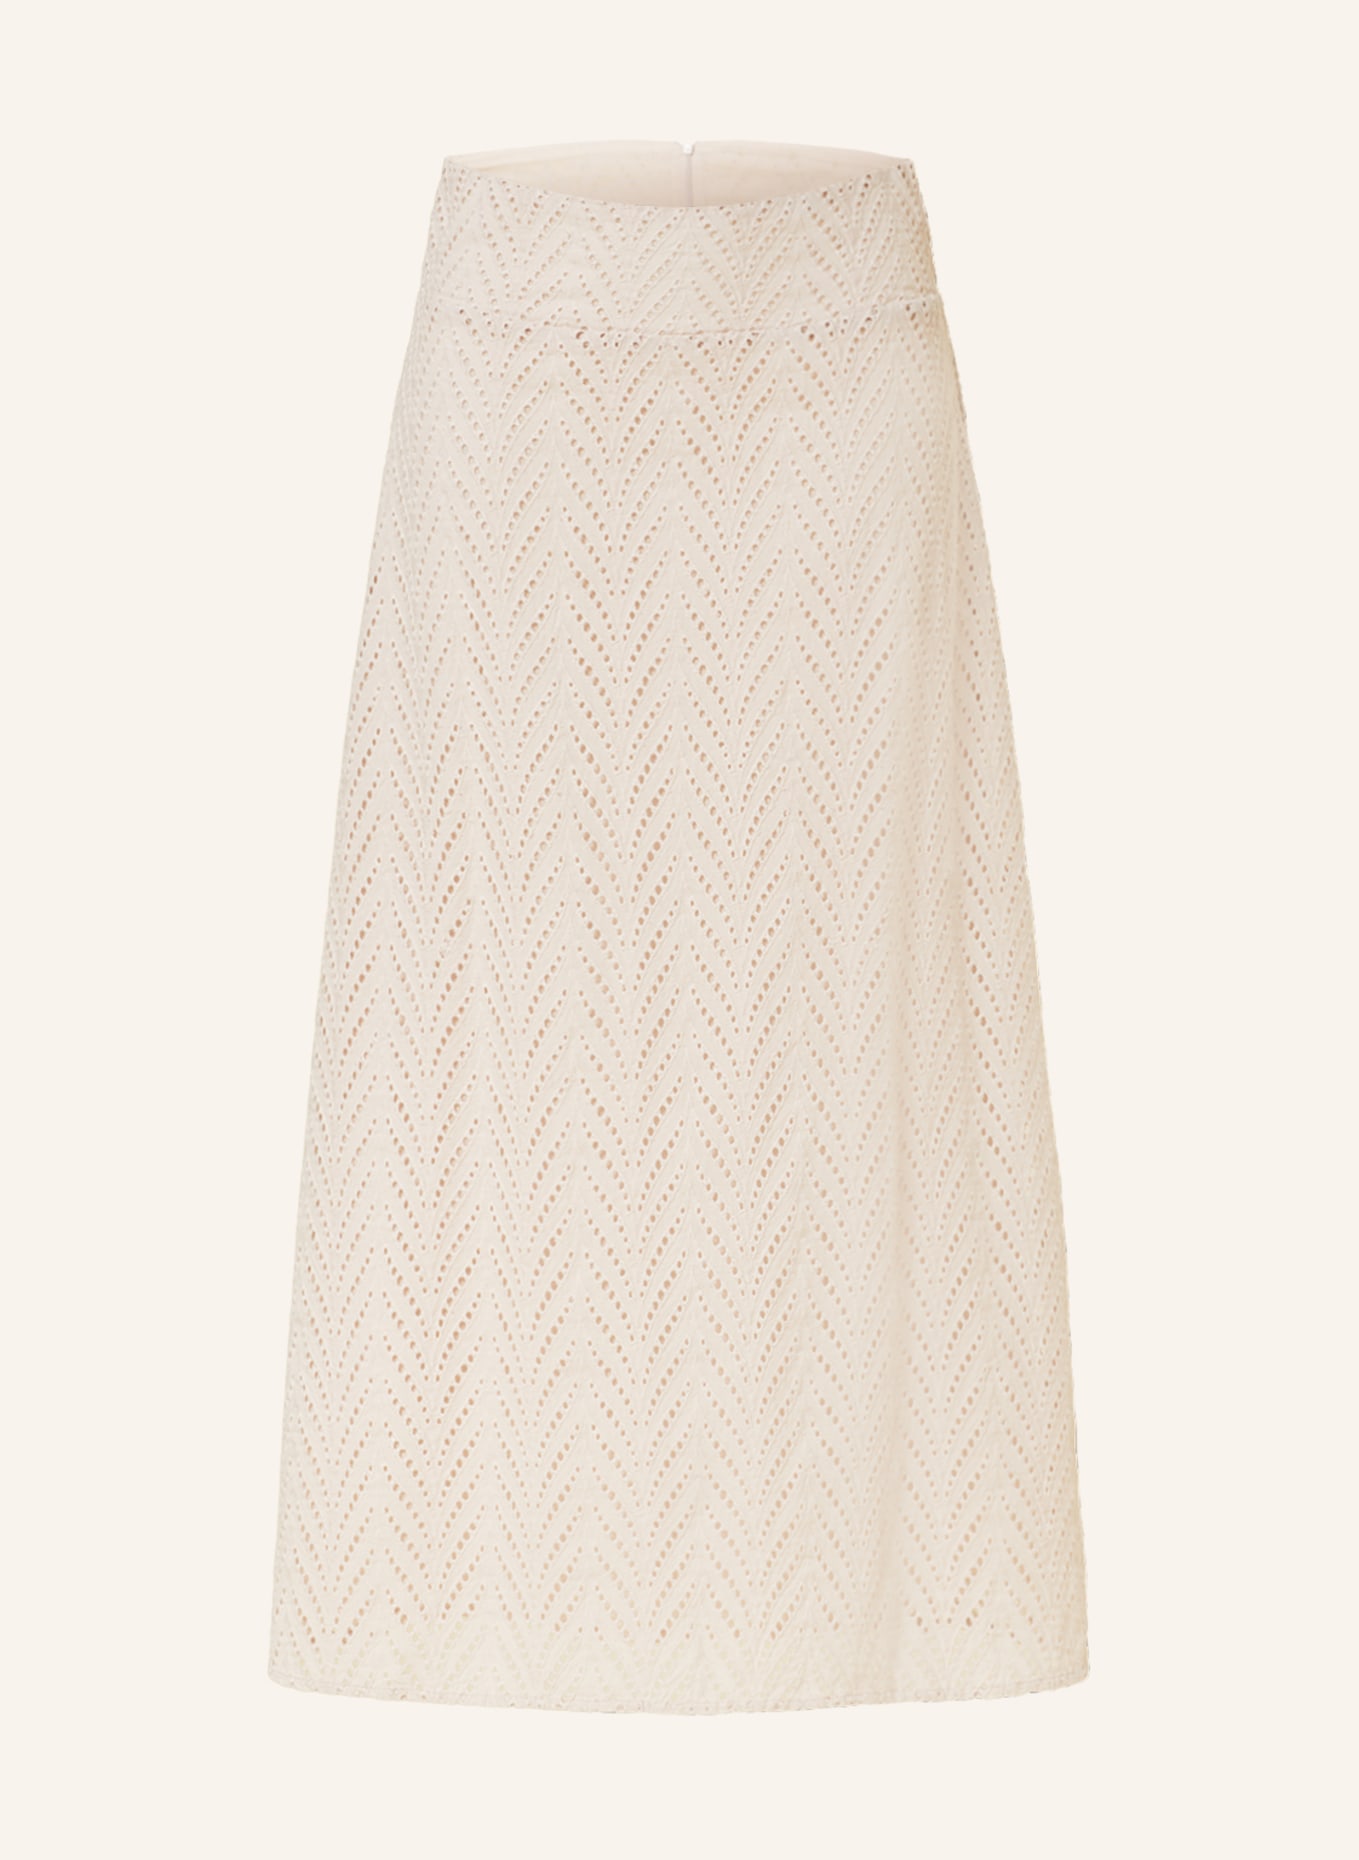 Broderie Anglaise Knit Skirt - Ready to Wear